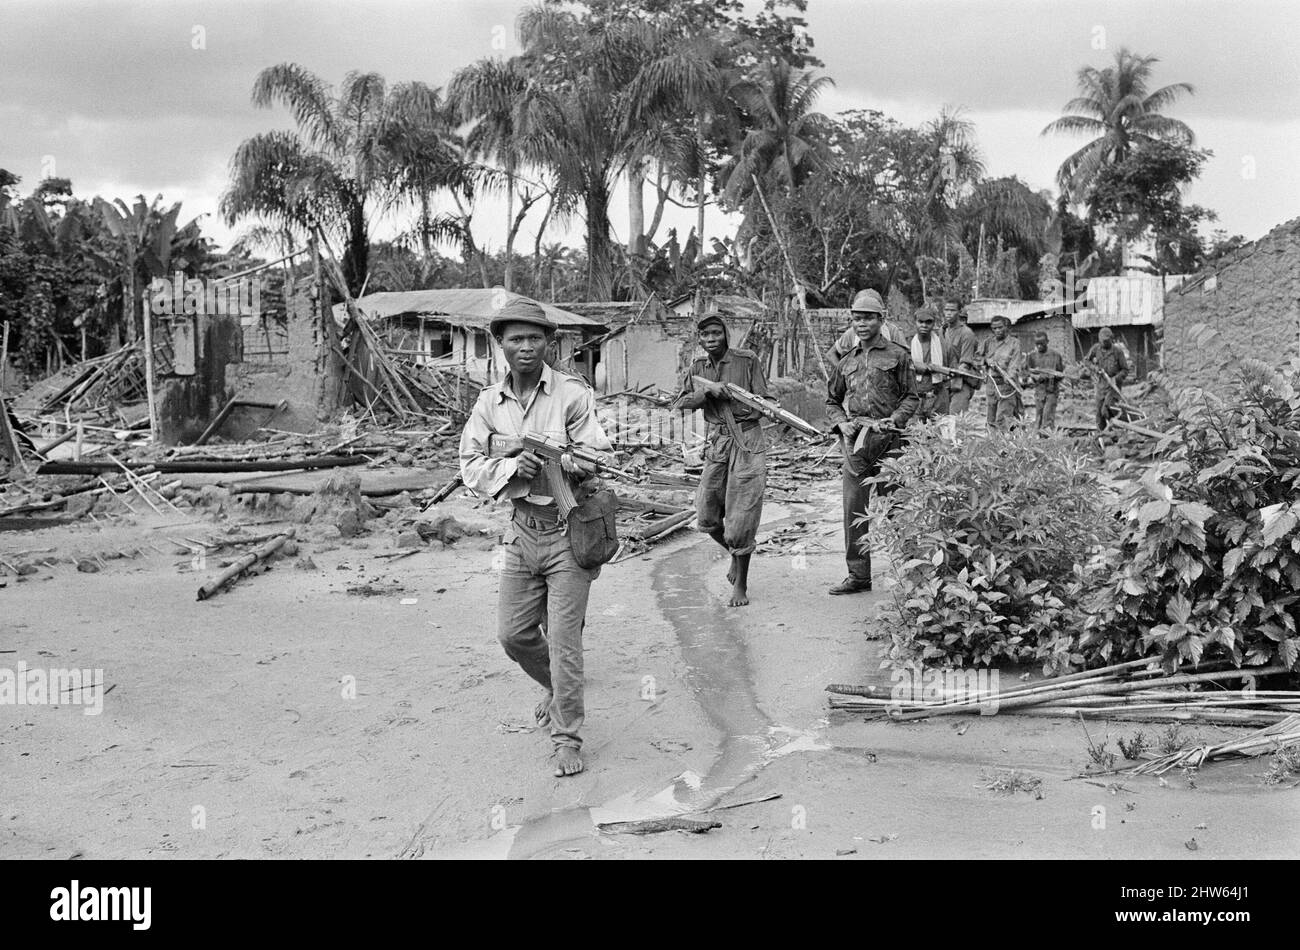 Biafran soldiers seen here advancing towards the Nigerian army during the Biafran conflict. 11th June 1968  The Nigerian Civil War, also known as the Biafran War endured for two and a half years, from  6 July 1967 to 15 January 1970, and was fought to counter the secession of Biafra from Nigeria. The indigenous Igbo people of Biafra felt they could no longer co-exist with the Northern-dominated federal government following independence from Great Britain. Political, economic, ethnic, cultural and religious tensions finally boiled over into civil war following the 1966 military coup, then  coun Stock Photo